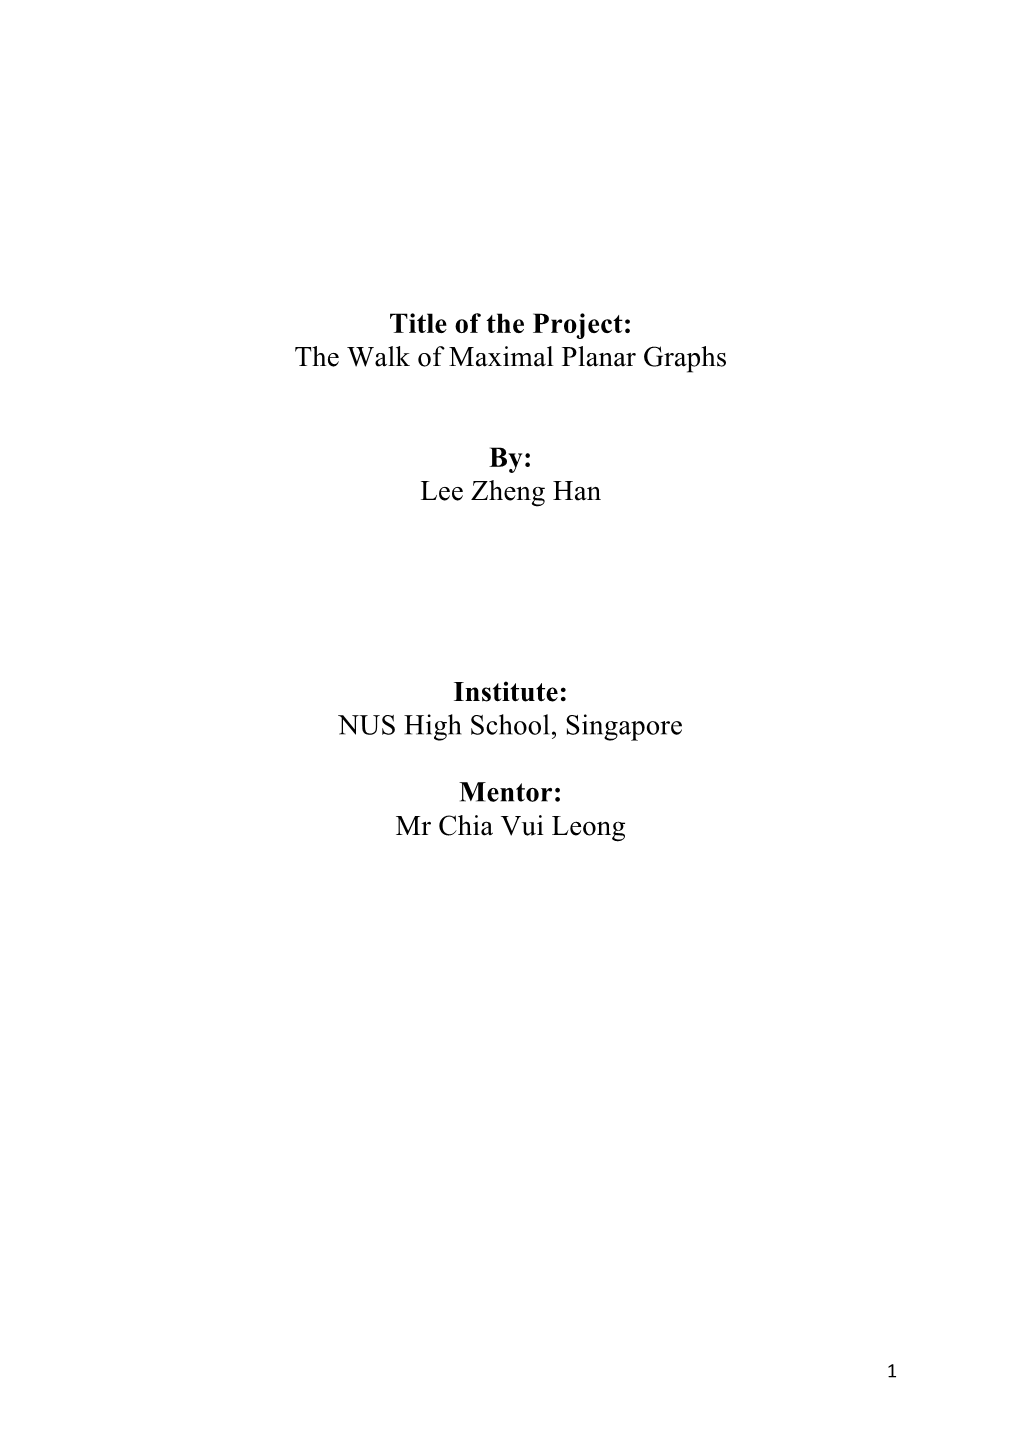 Title of the Project: the Walk of Maximal Planar Graphs By: Lee